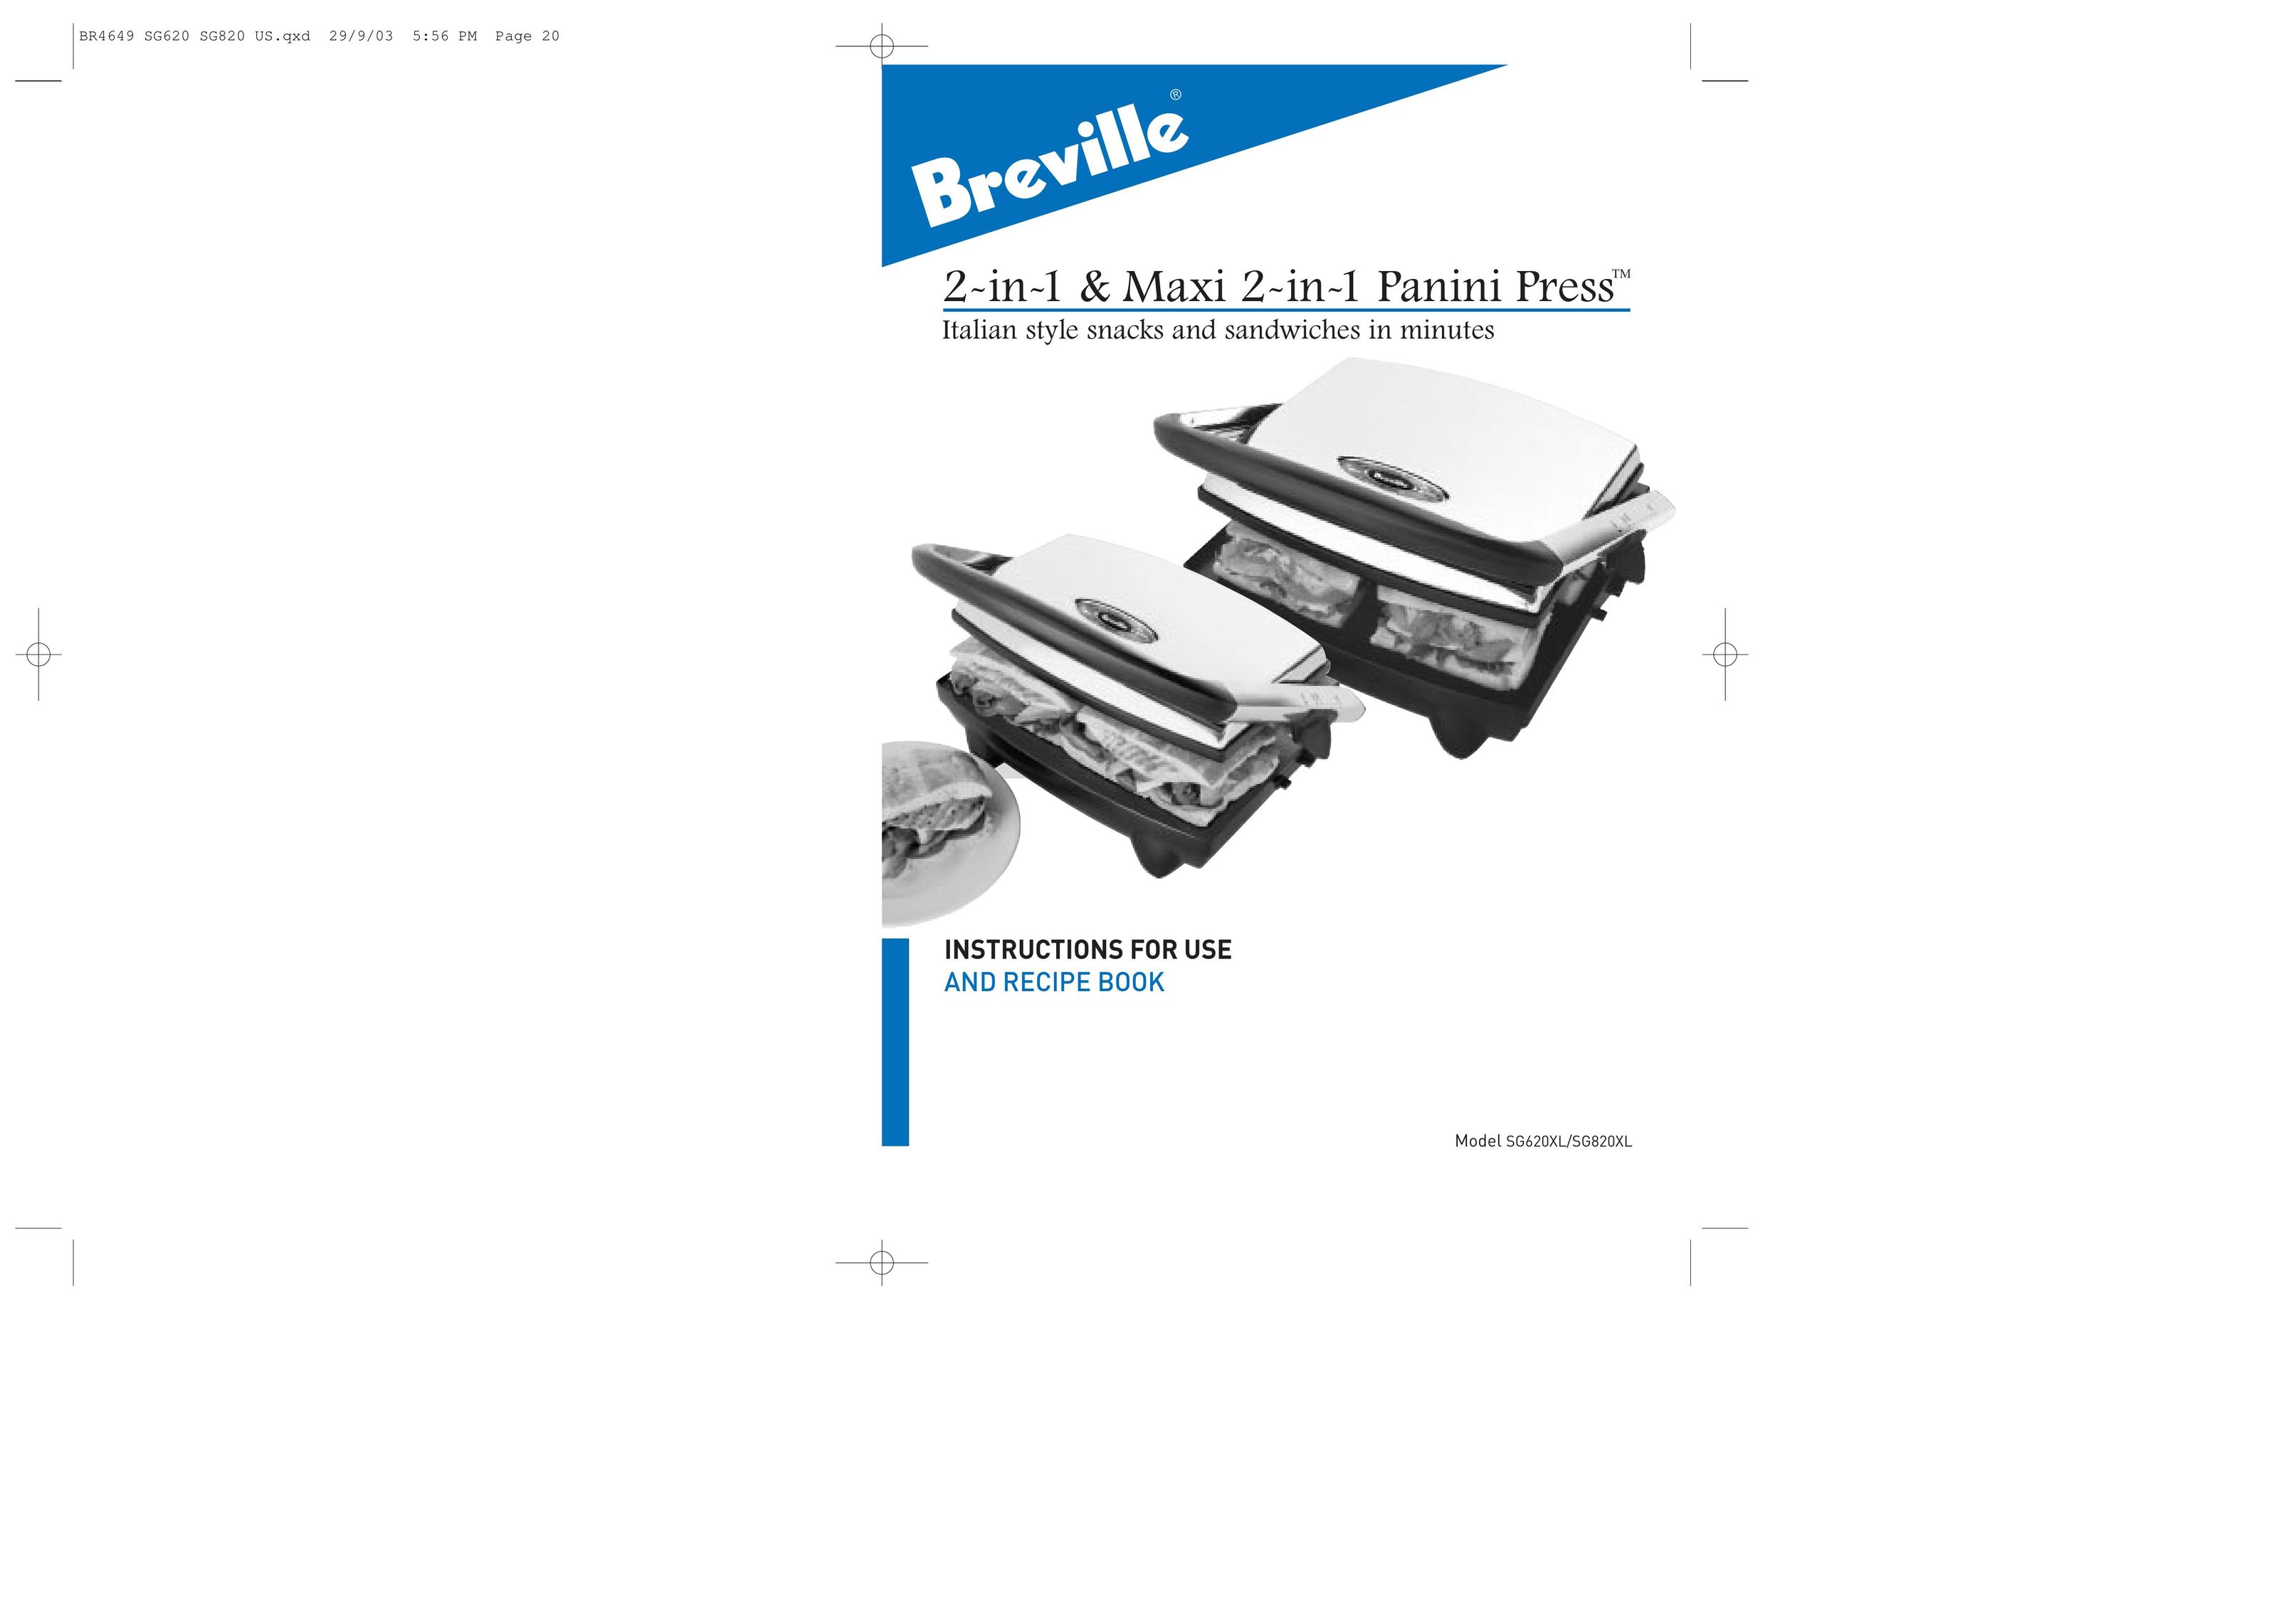 Breville SG620XL Kitchen Grill User Manual